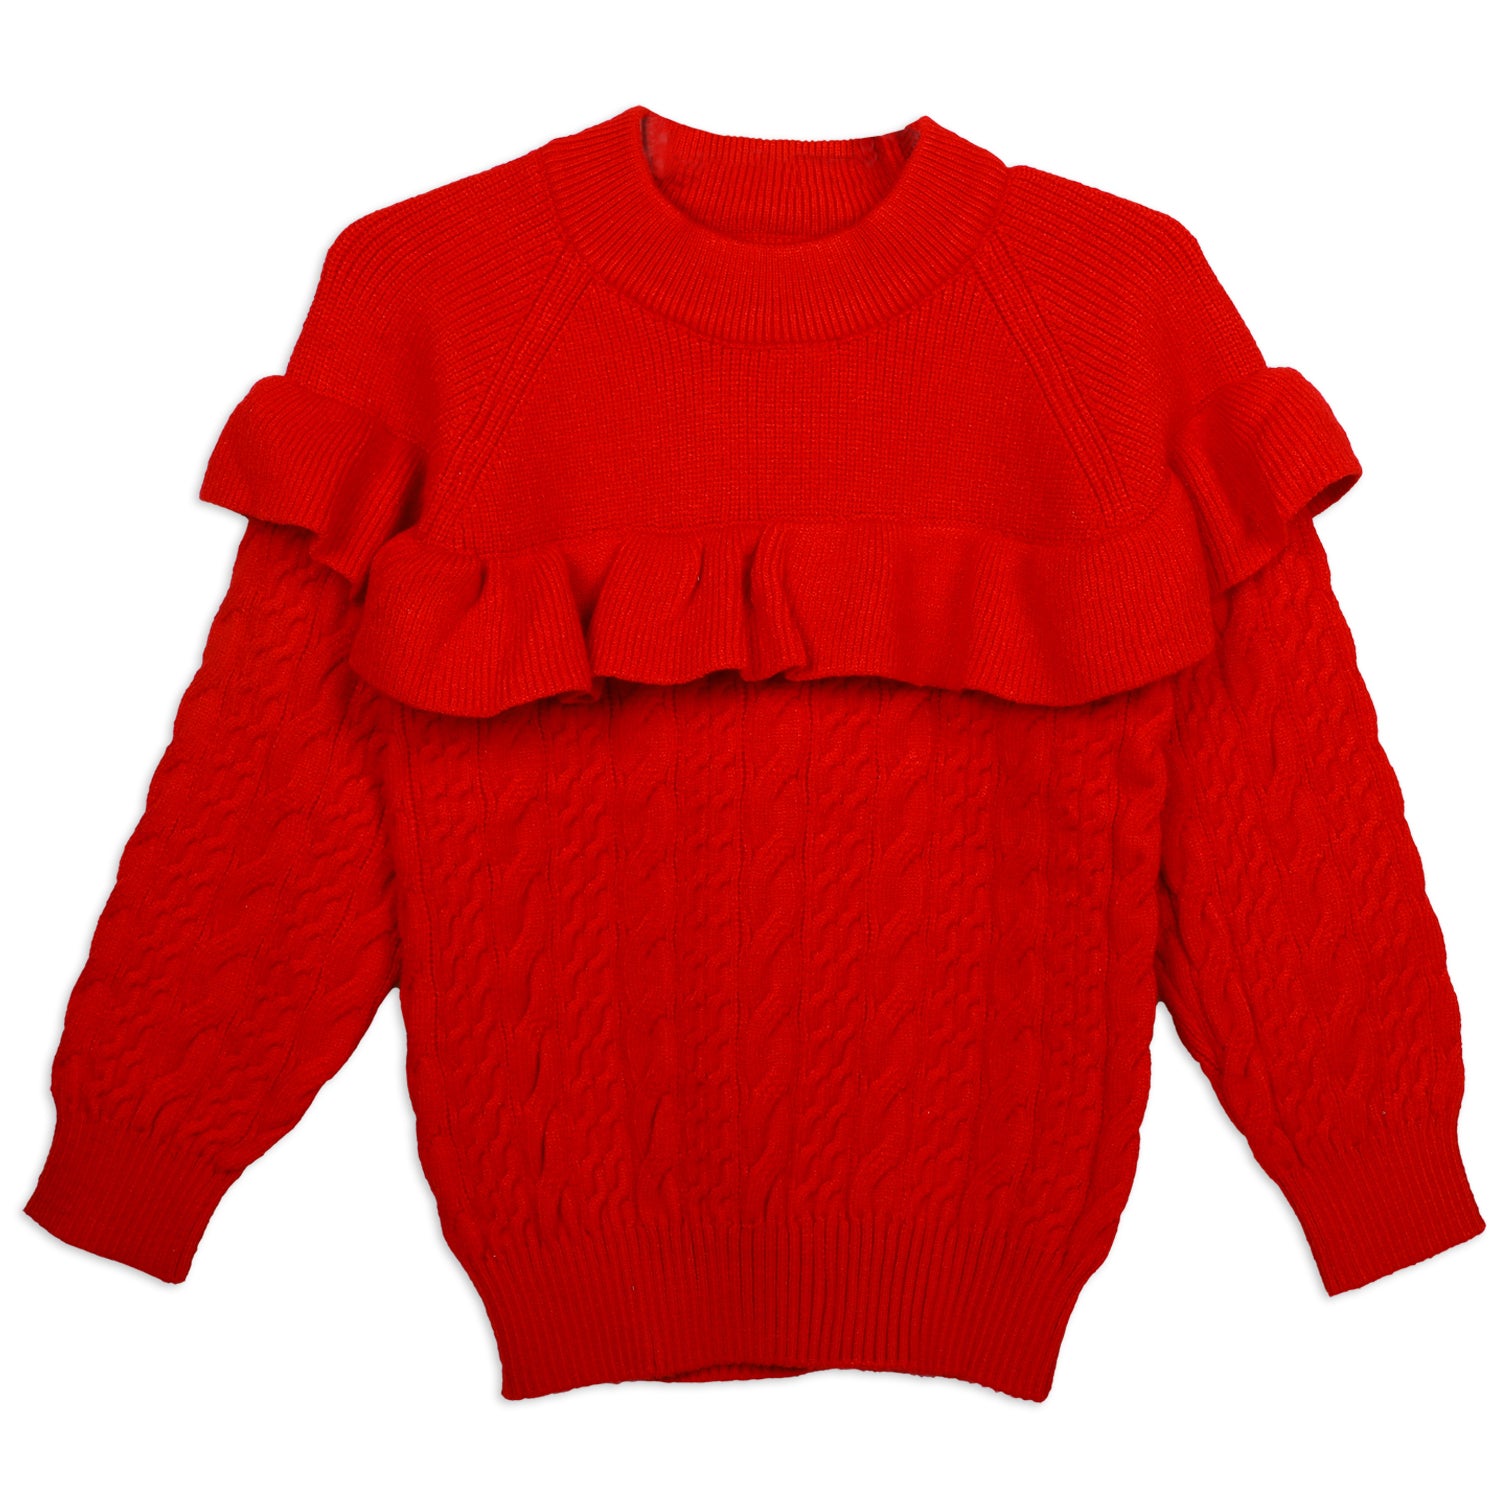 Ruffled Jumper Solid Premium Full Sleeves Braided Knit Sweater - Red